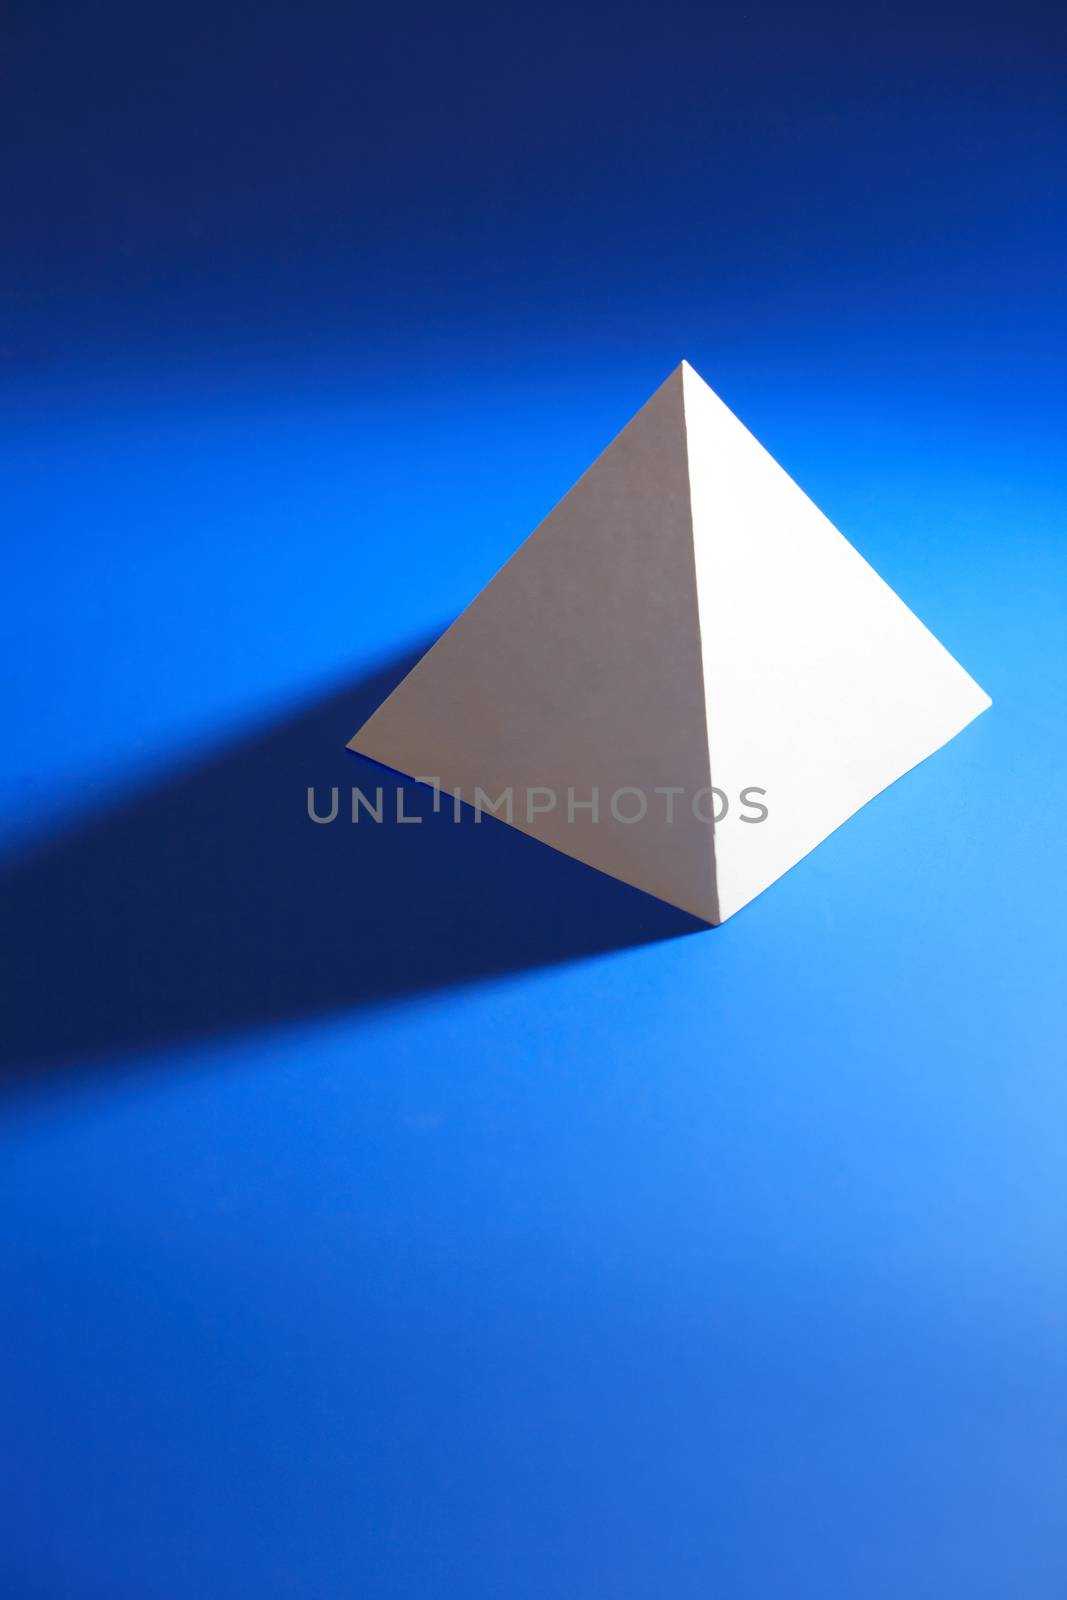 Geometry concept. One white paper pyramid on blue background